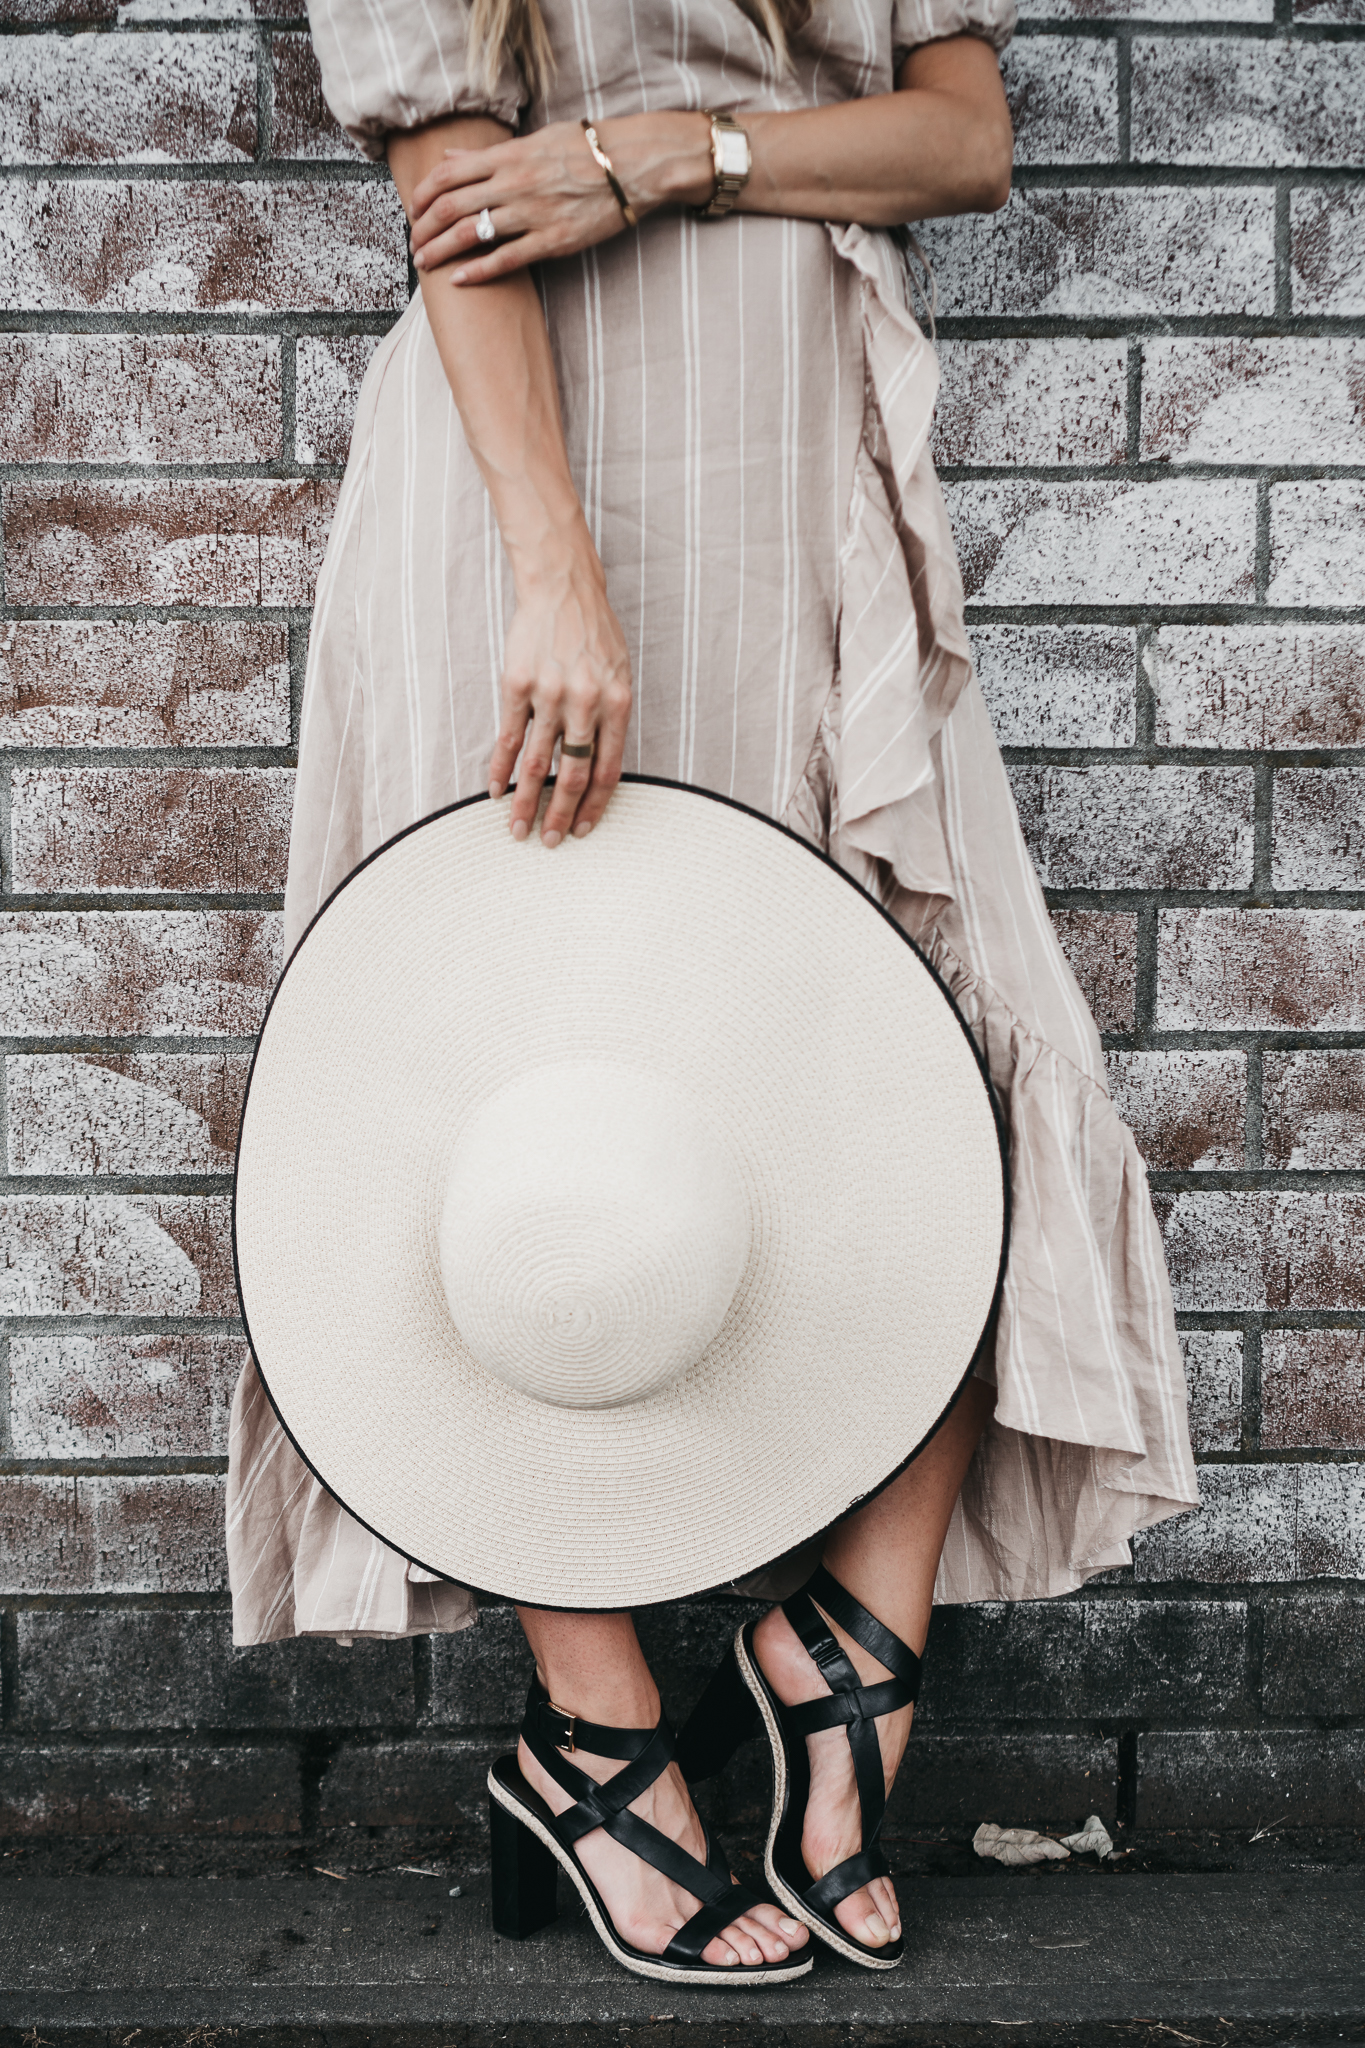 Cortney Bigelow of The Grey Edit - Fremont Parking Lot -Summer Style - Stories Striped Linen Wrap Dress - AUrate Ring - Wide Brim Hat